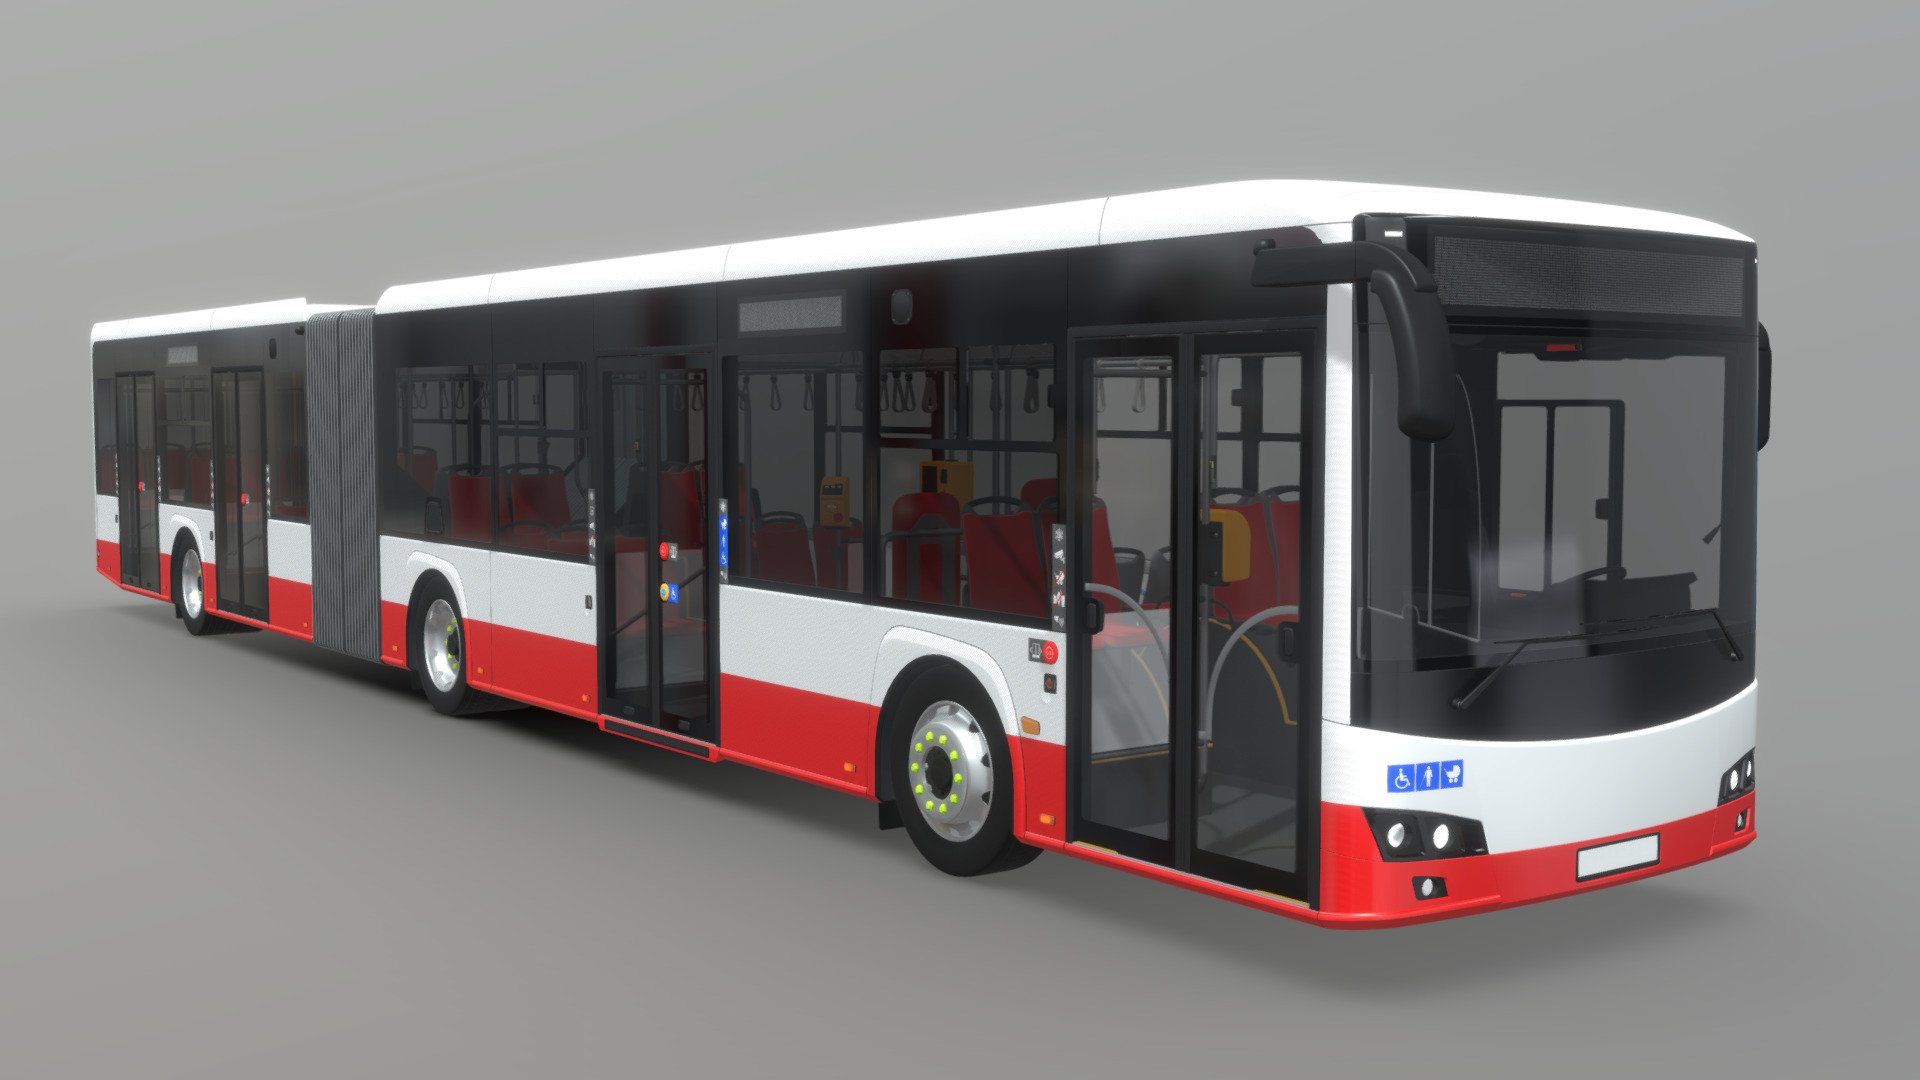 Model presents a new entry to my bus collection. It’s a new member of a family of II generation buses which will include new original, high-poly design. This is a 18-meter version of a hybrid bus, which offers 43 seats, and features new outward swinging, pneumatic doors 3d model